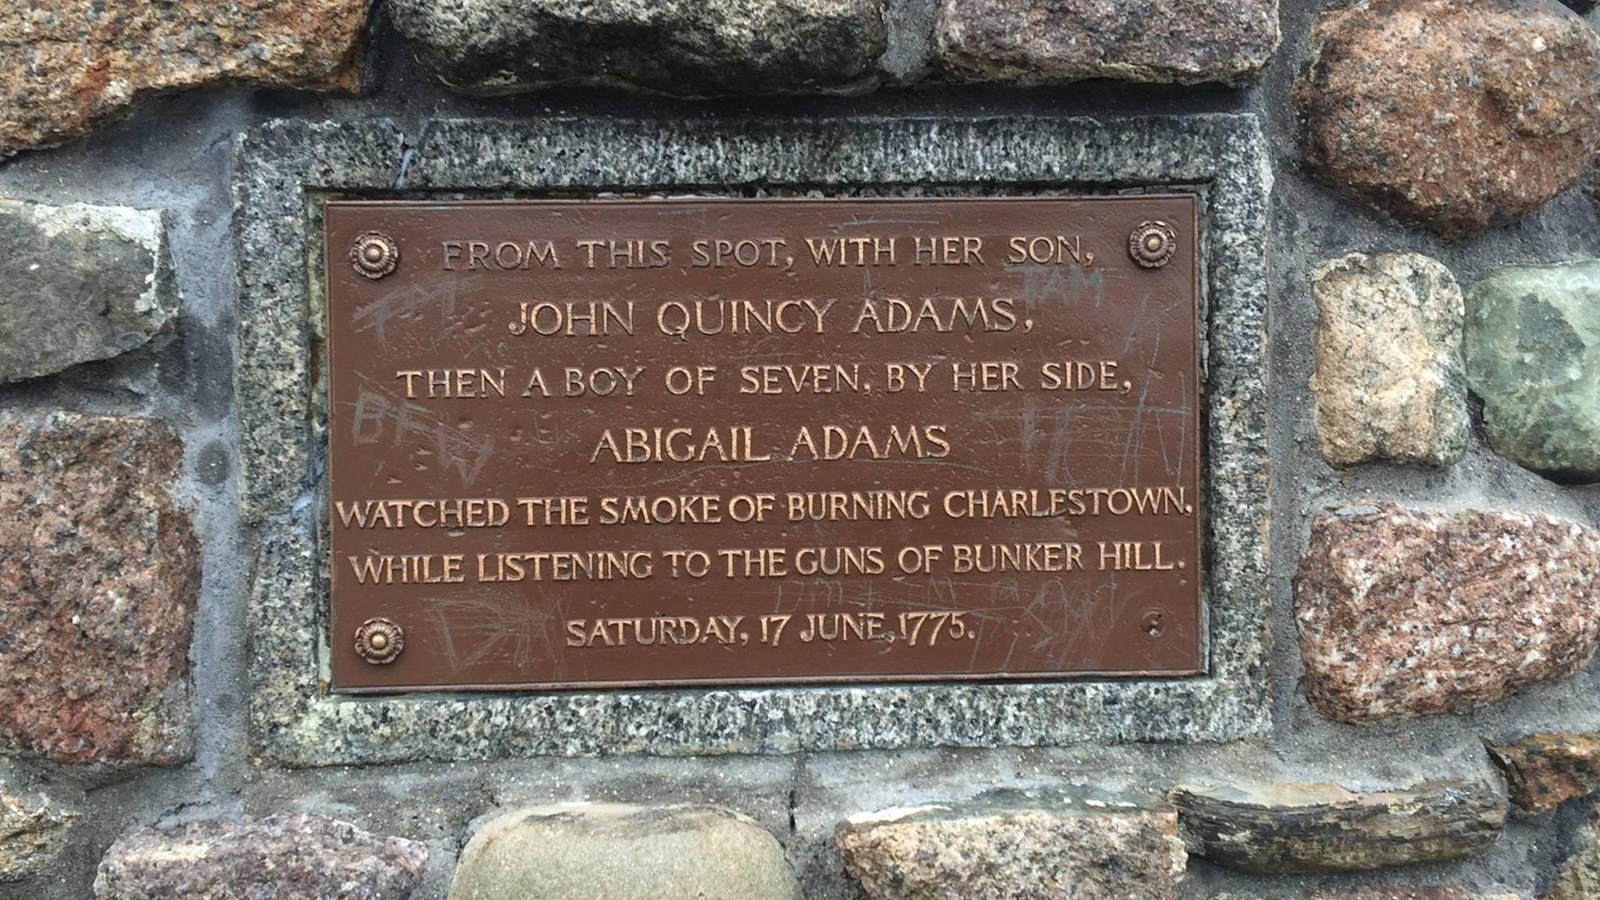 A plaque on the Abigail Adams Cairn detailing what it is.